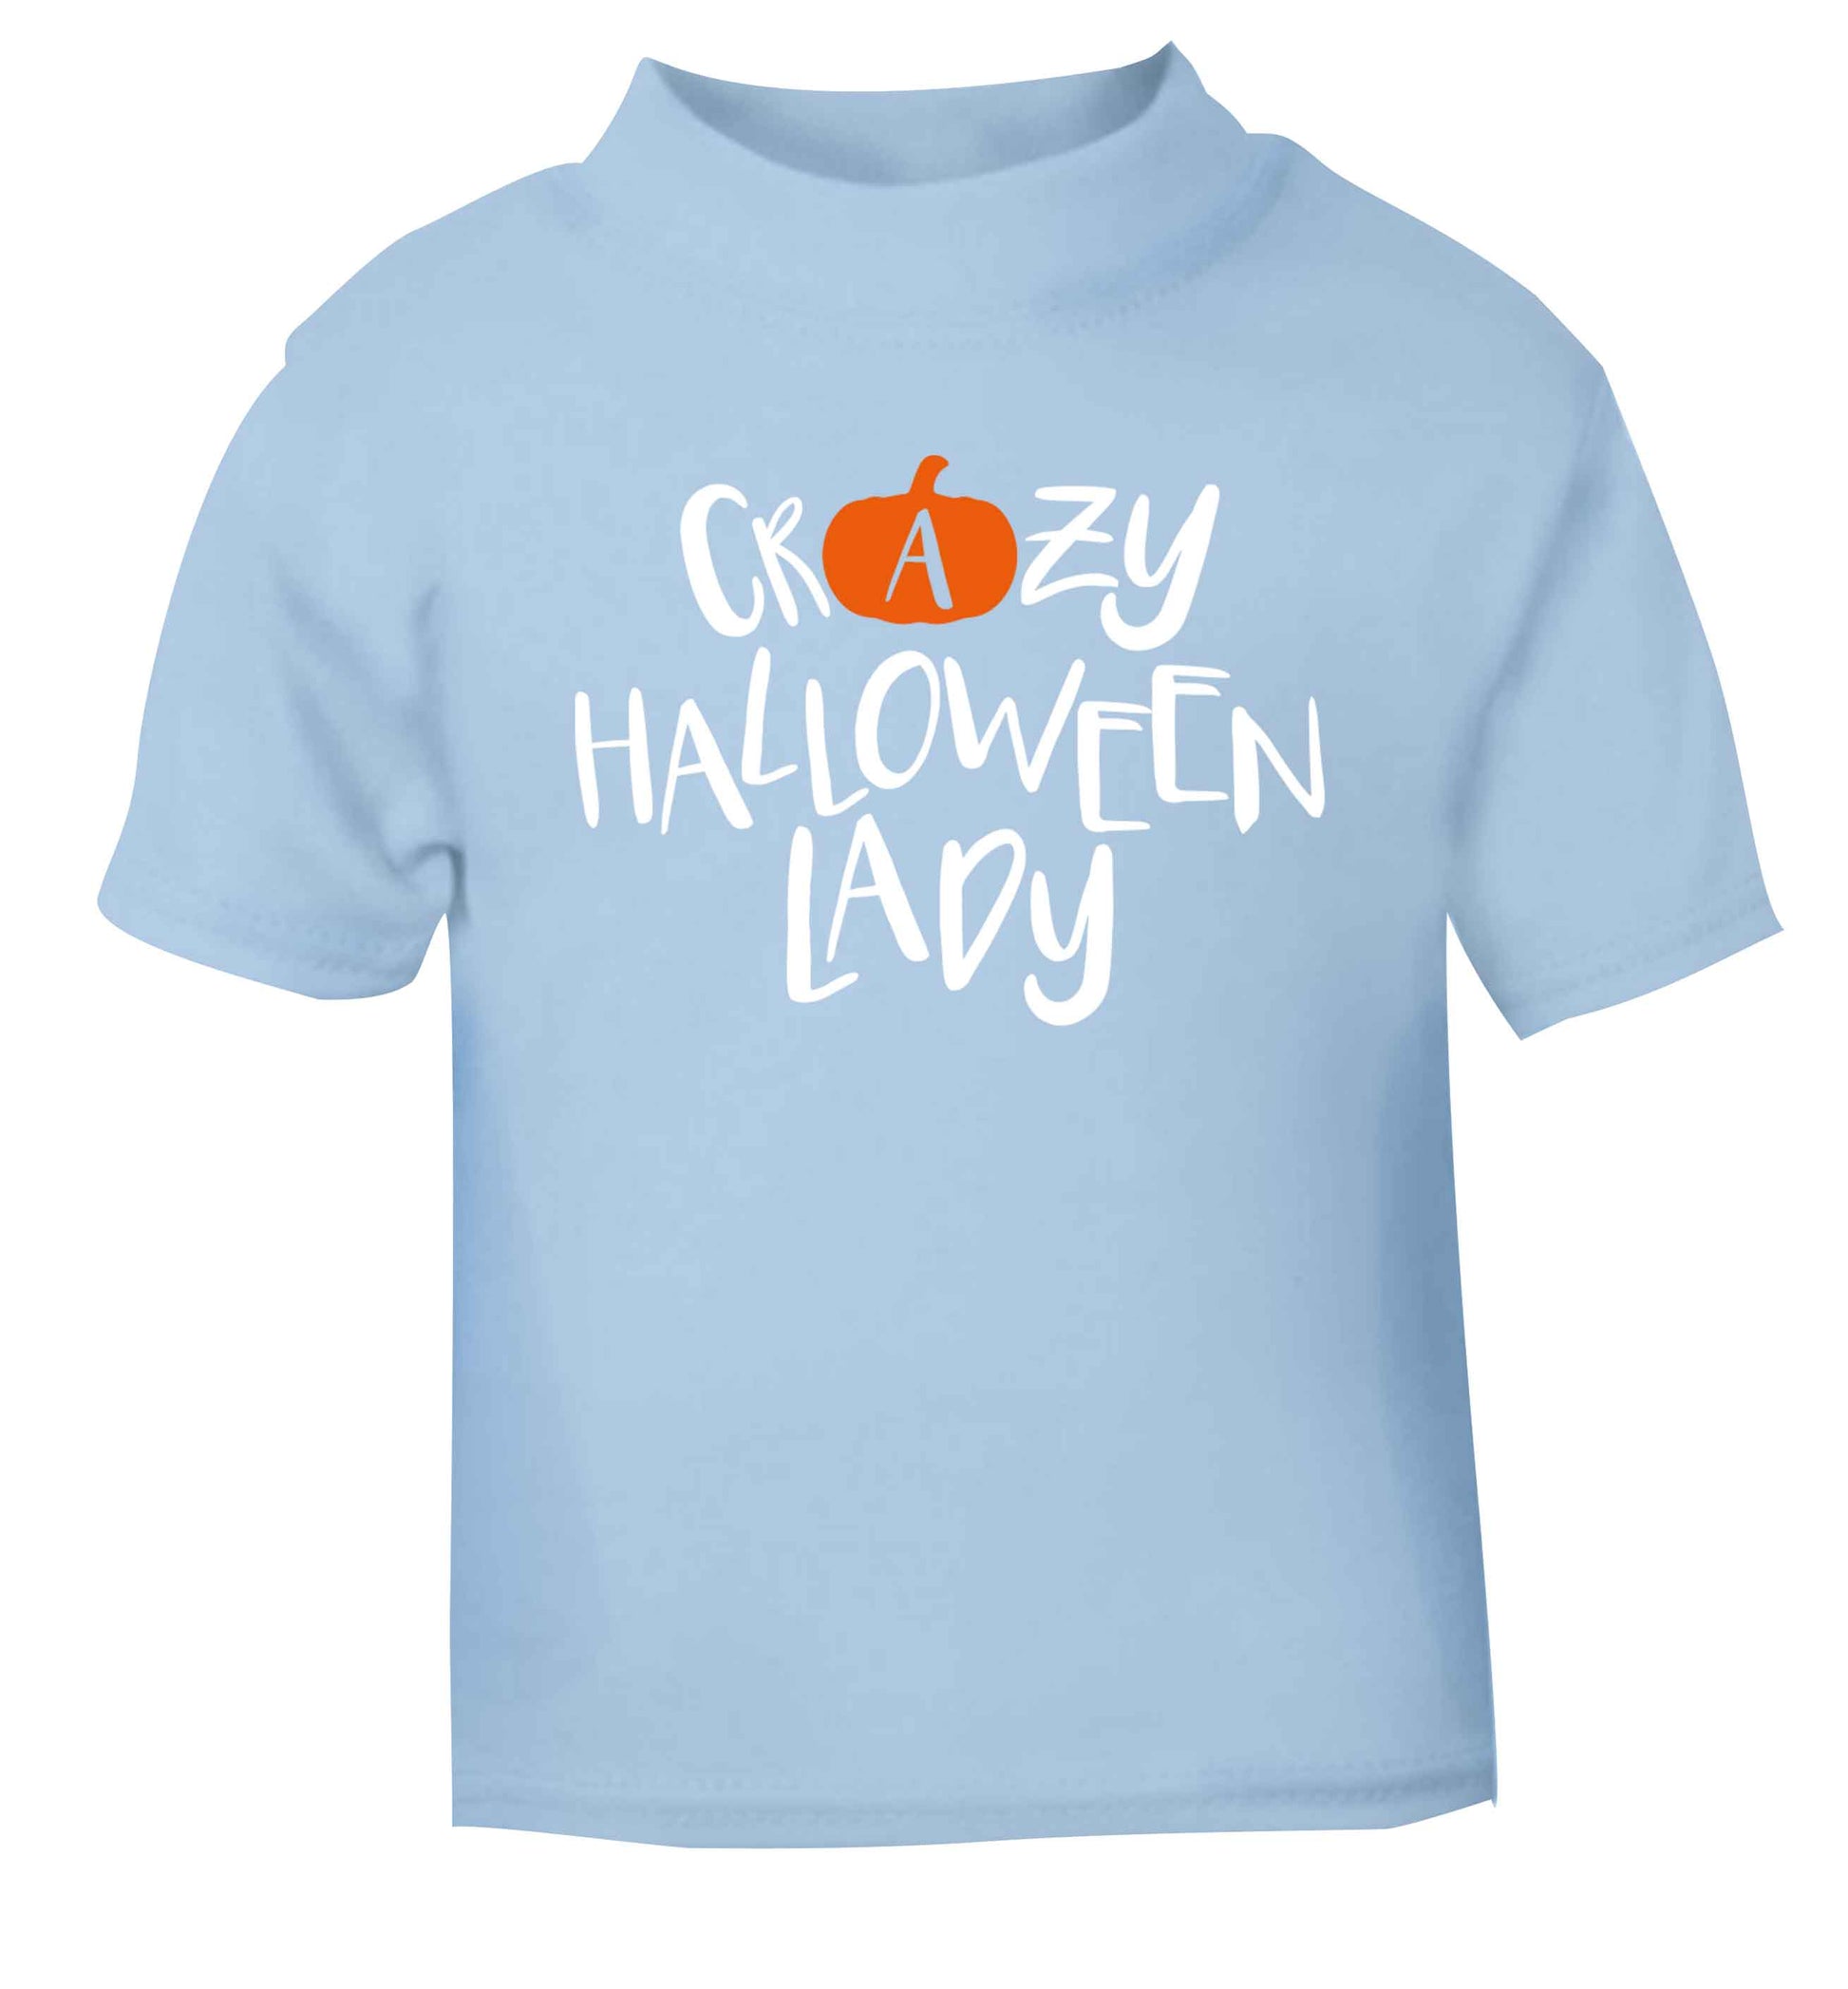 Crazy halloween lady light blue baby toddler Tshirt 2 Years